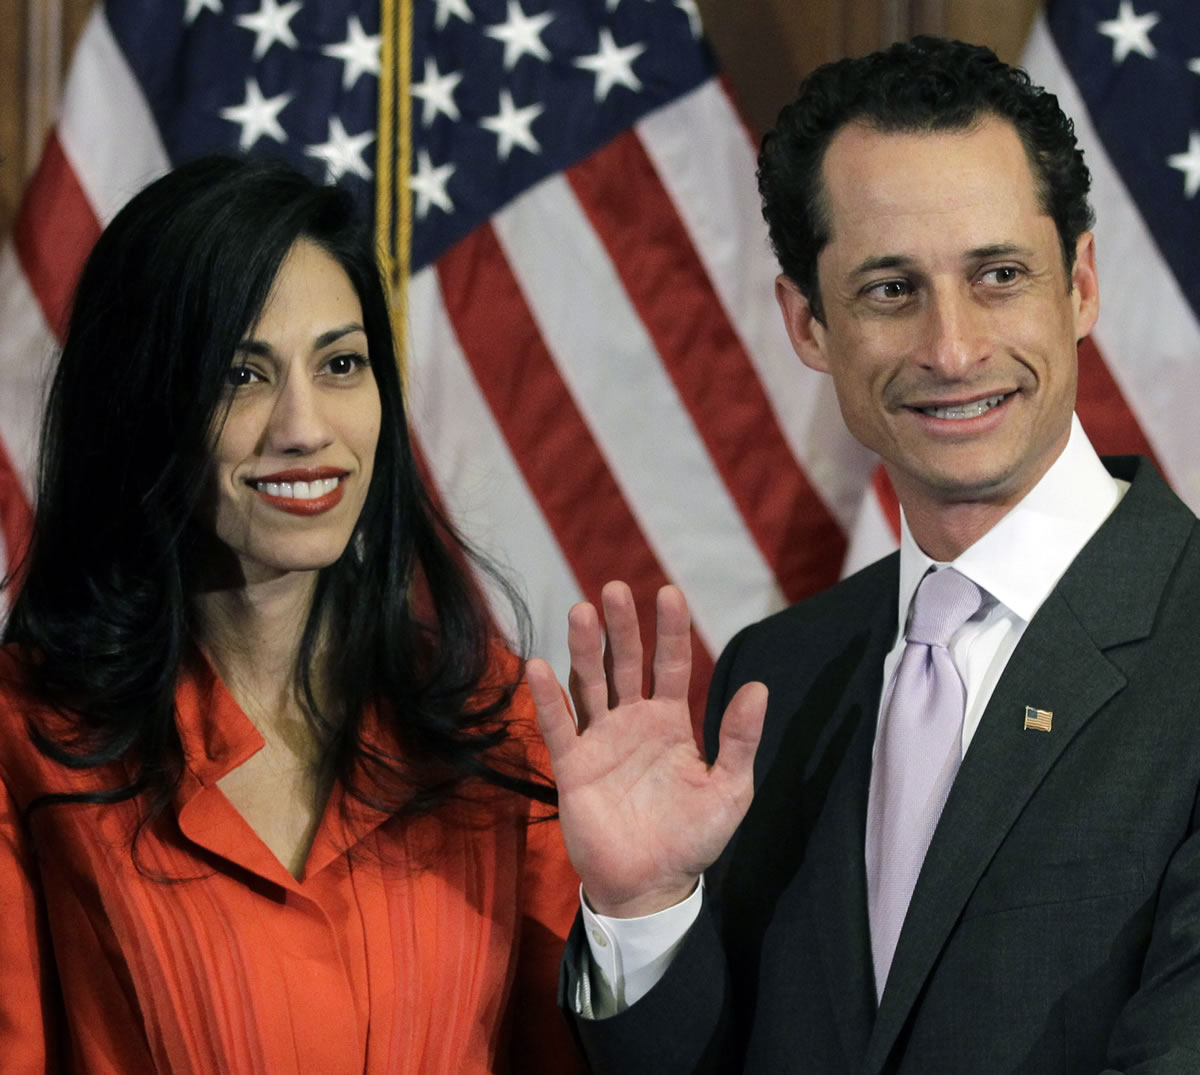 Anthony Weiner and his wife Huma Abedin pose for photographs after the ceremonial swearing in of the 112th Congress on Capitol Hill in Washington in January 2011.